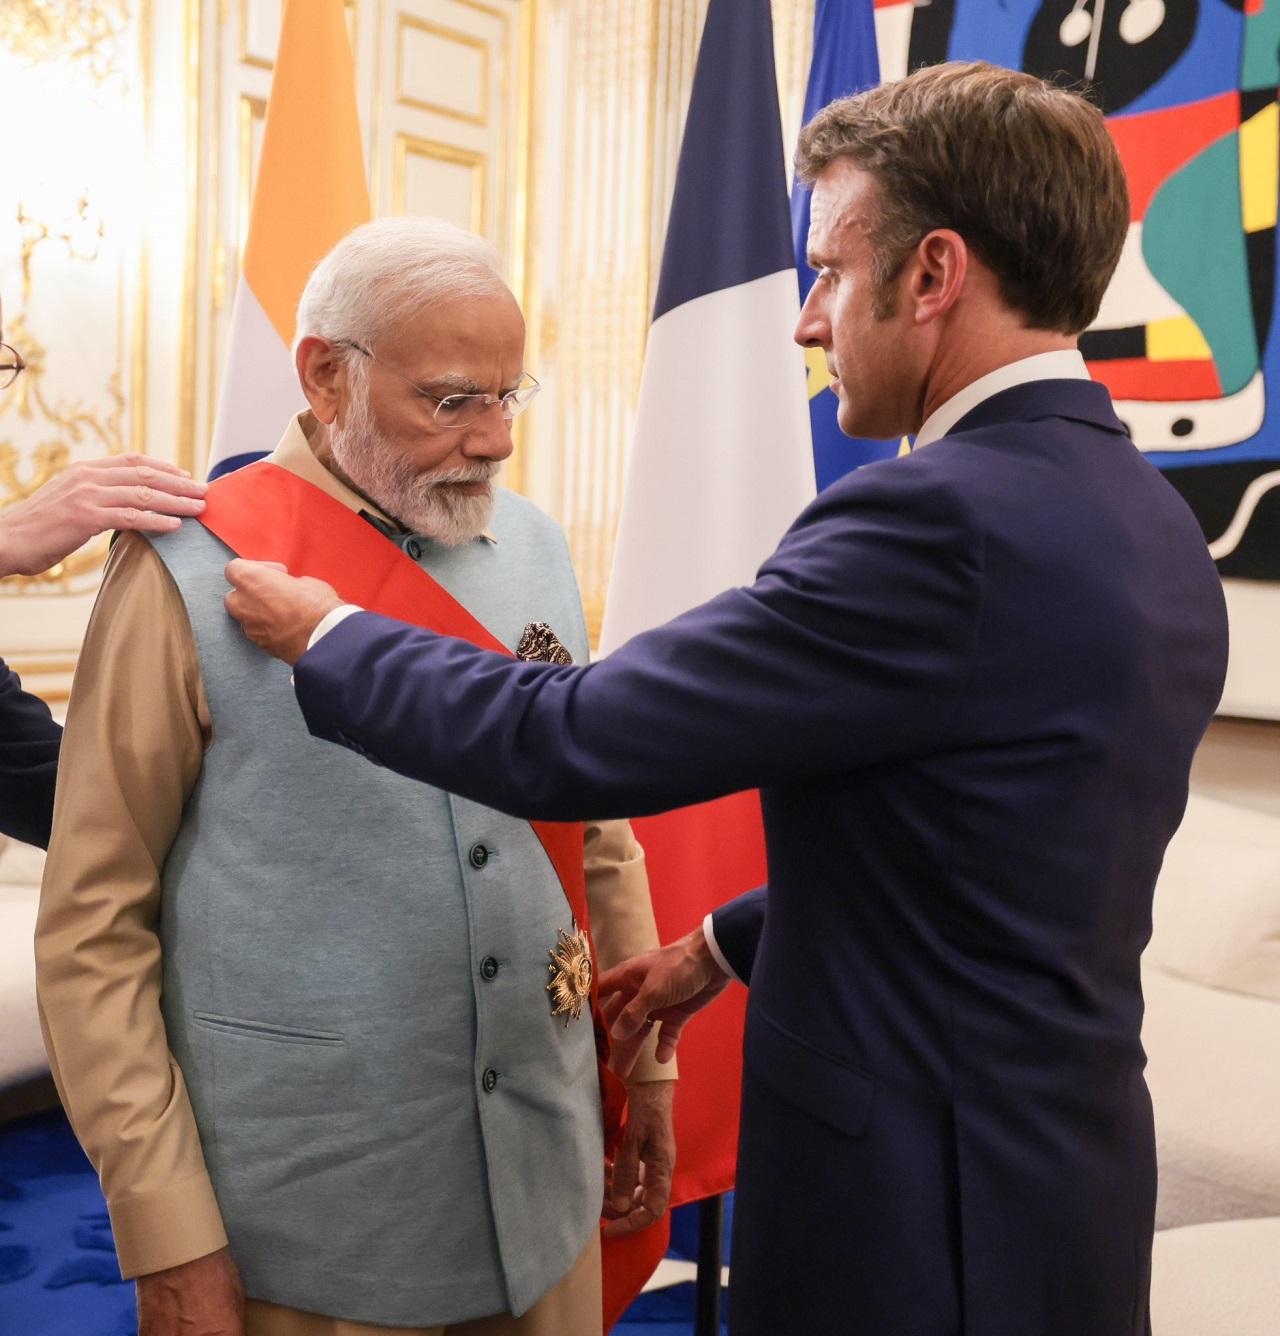 PM Modi received the honour at the Elysee Palace here on Thursday and joined the ranks of other prominent world leaders such as the former president of South Africa Nelson Mandela, King Charles - the then Prince of Wales, former Chancellor of Germany Angela Merkel, Boutros Boutros-Ghali, former Secretary General of the United Nations, among others